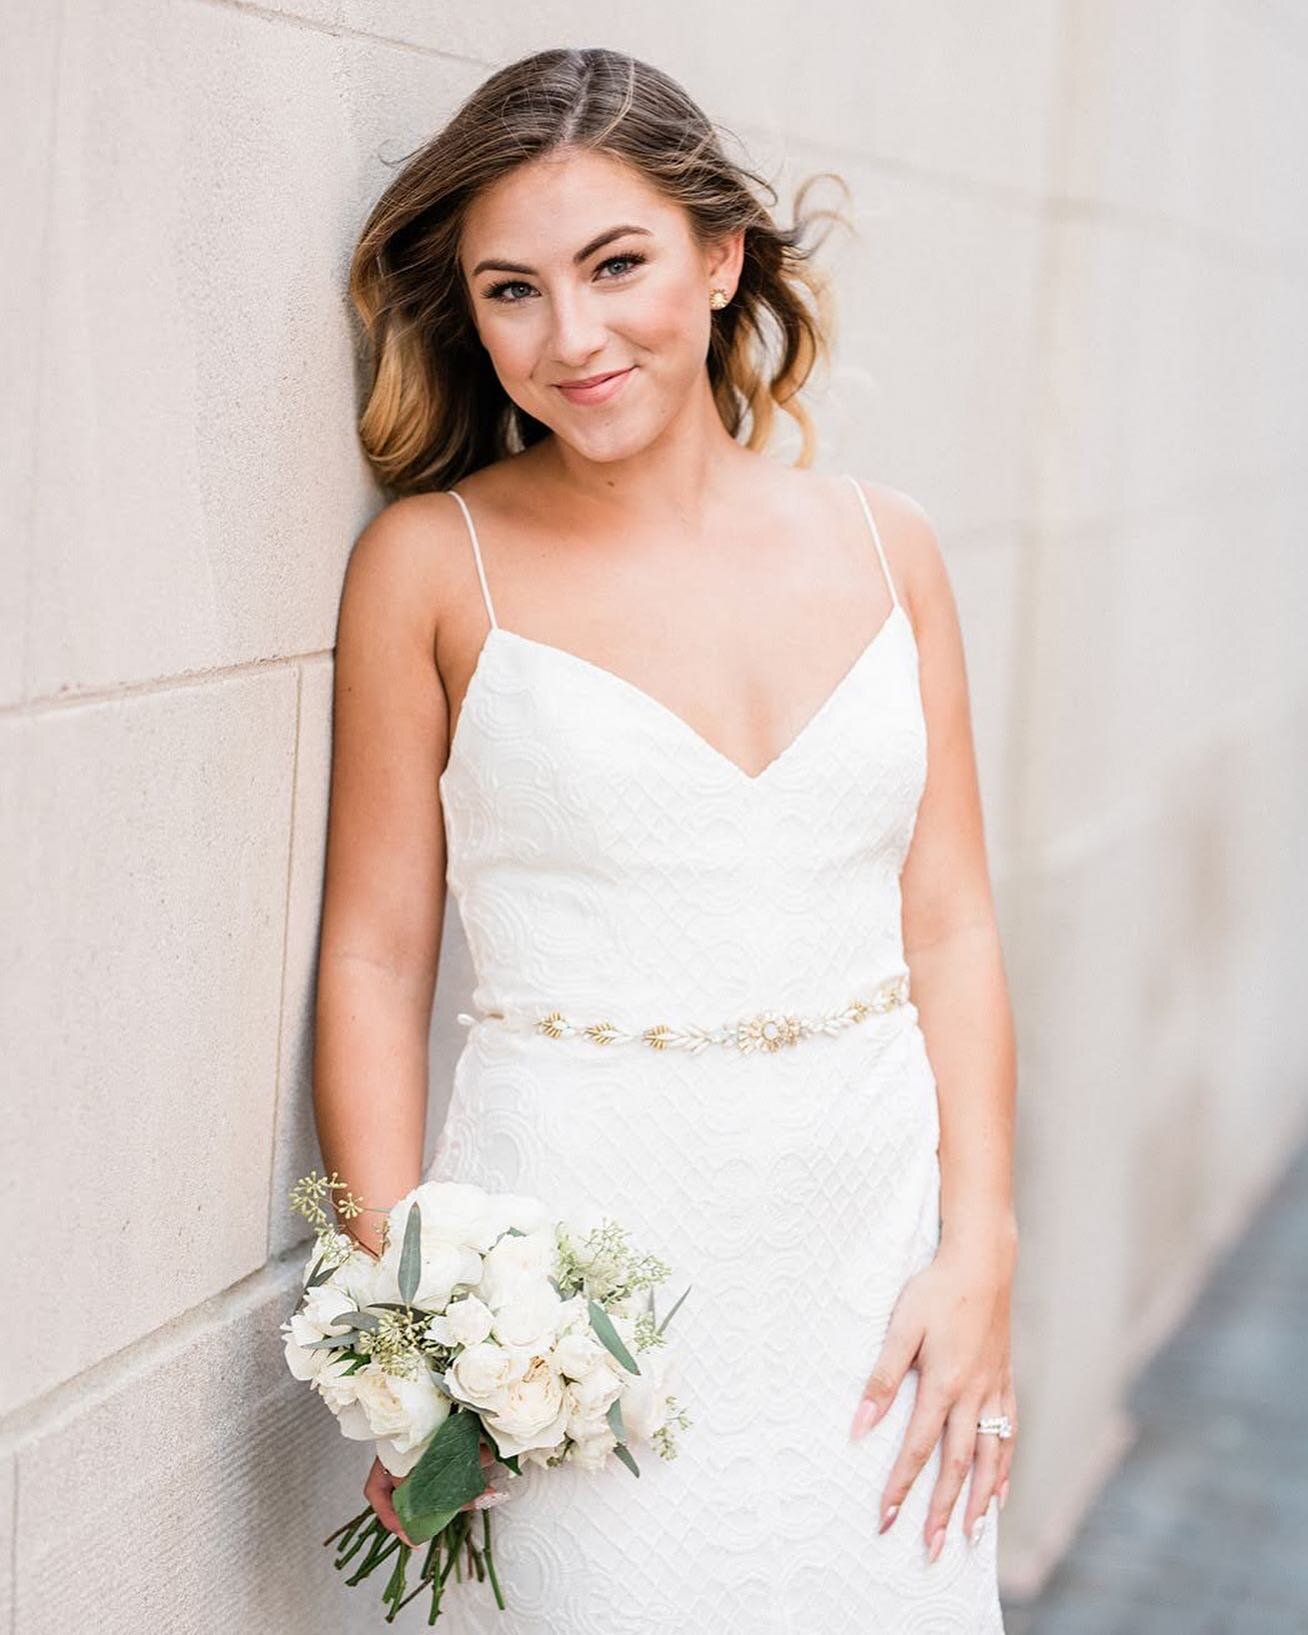 The relaxed look when you look amazing in your wedding dress 🤍
.
.
.
📸: 

Photography: @balsamandblushphotography
Makeup: @american_beauty_artistry_llc
Hair: @megancoxbridal
Dresses &amp; accessories: @ivoryandashbridal
Rings: @cambridgejewelers
Fl